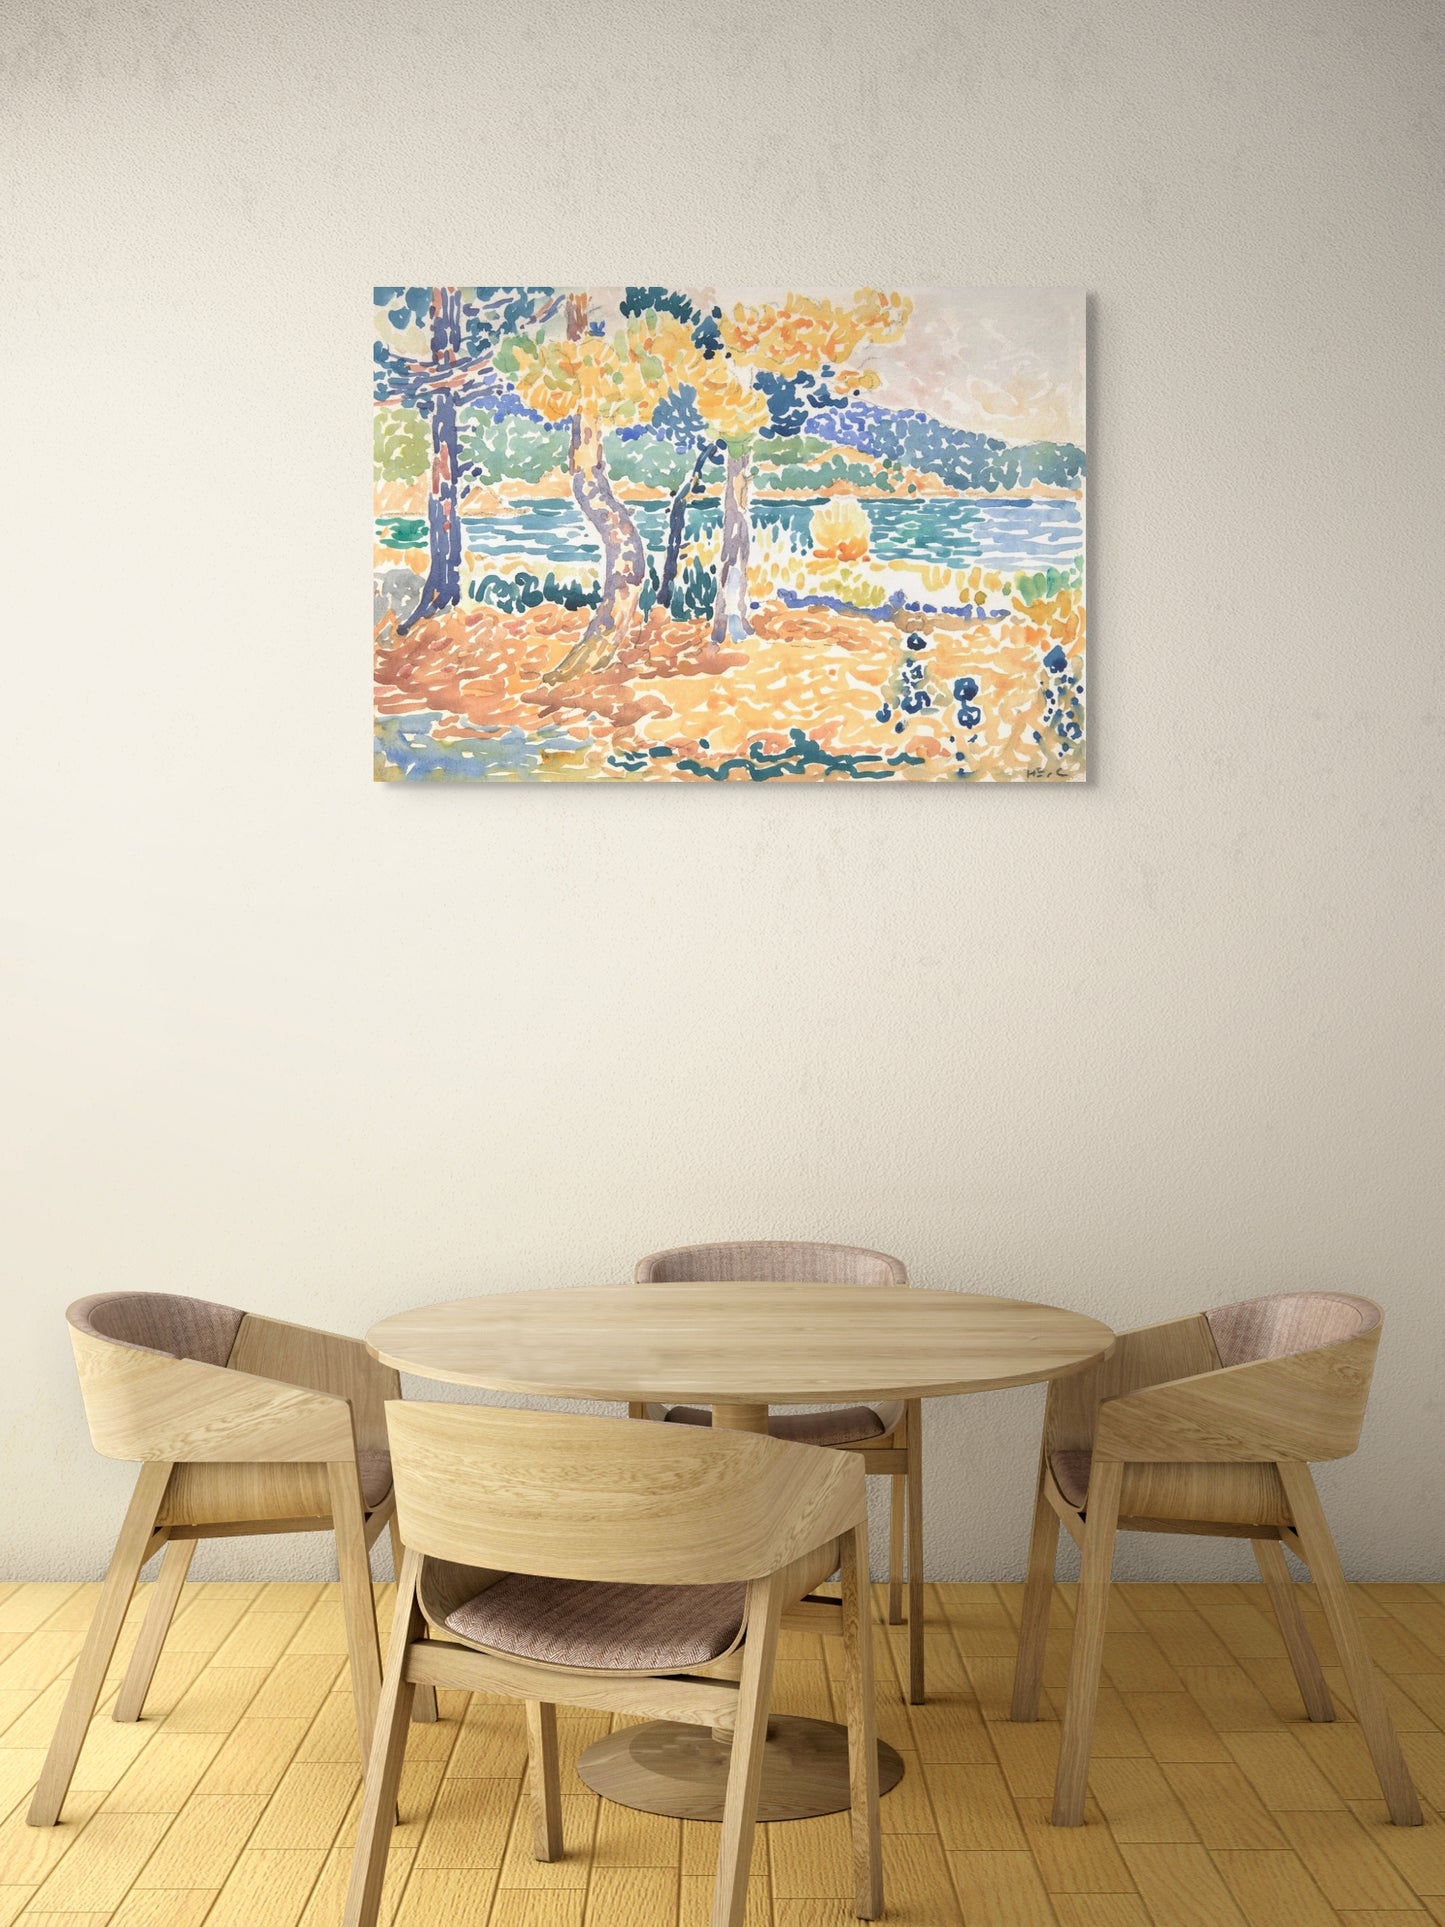 a table and chairs in a room with a painting on the wall